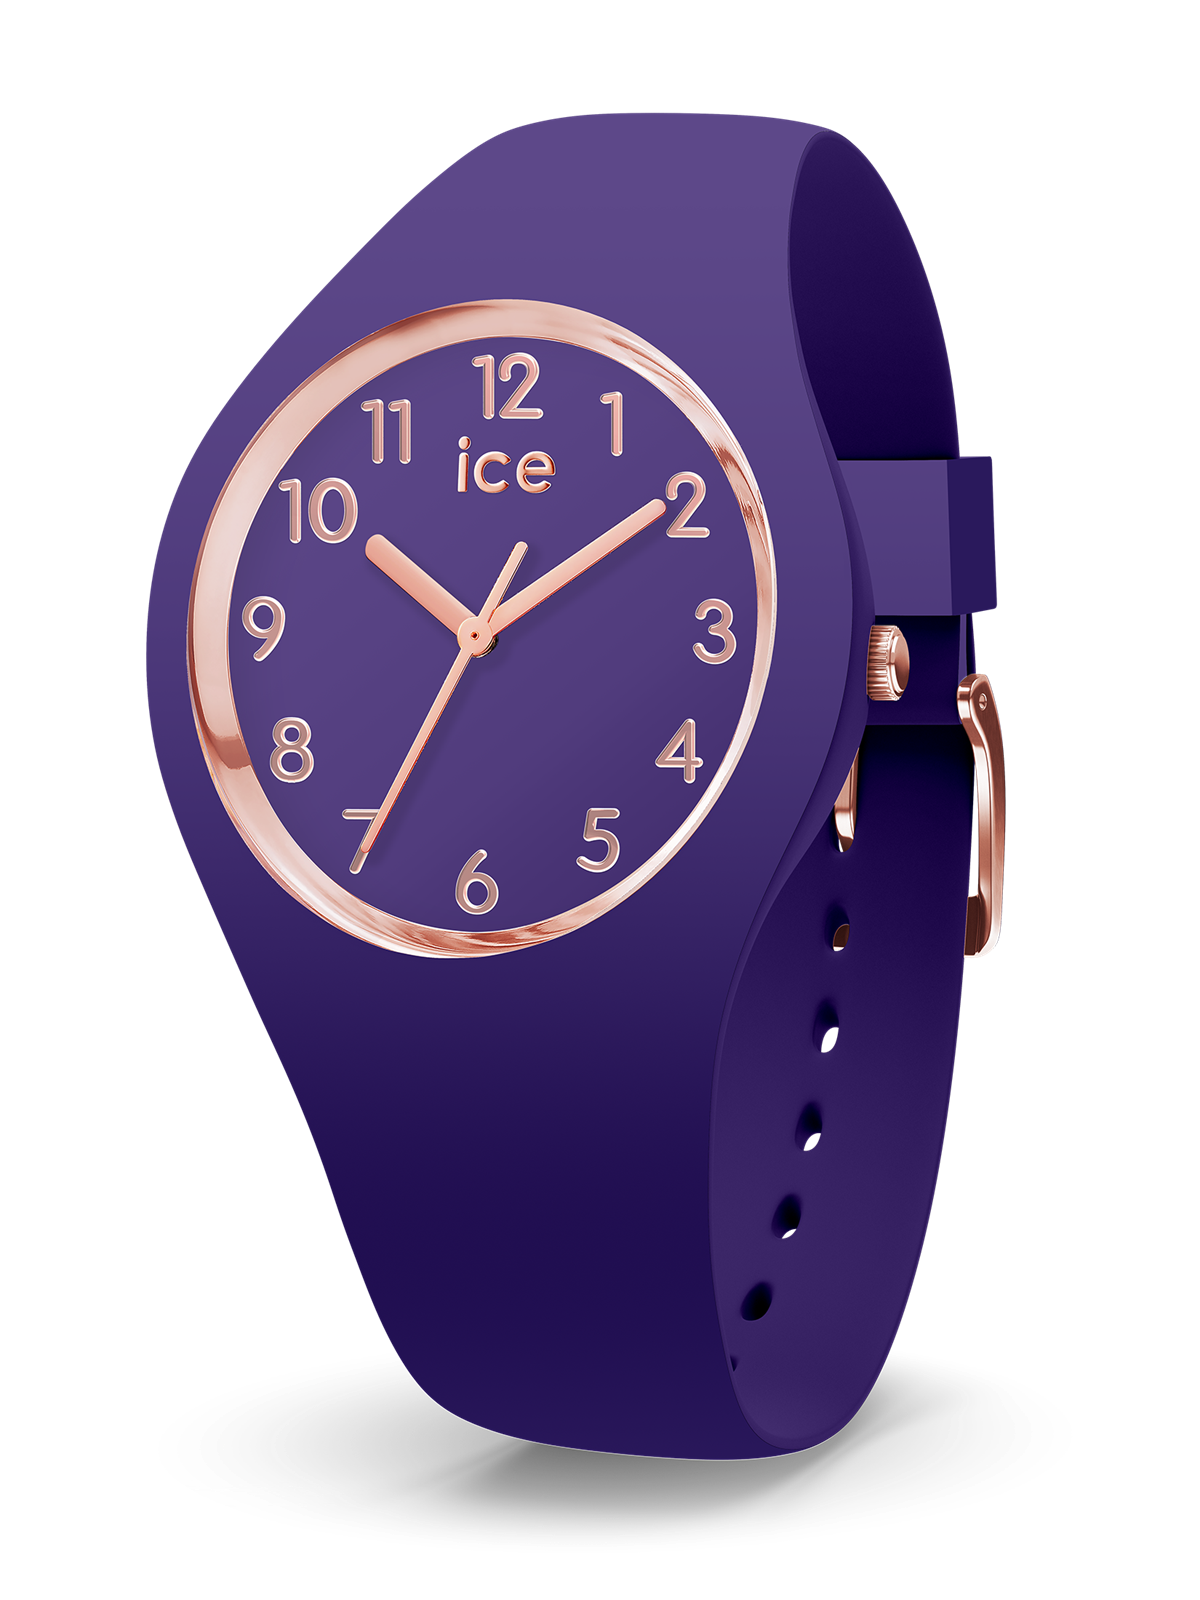 ice-watch_ICE Glam 015695 Ultra Violet_E 89,00